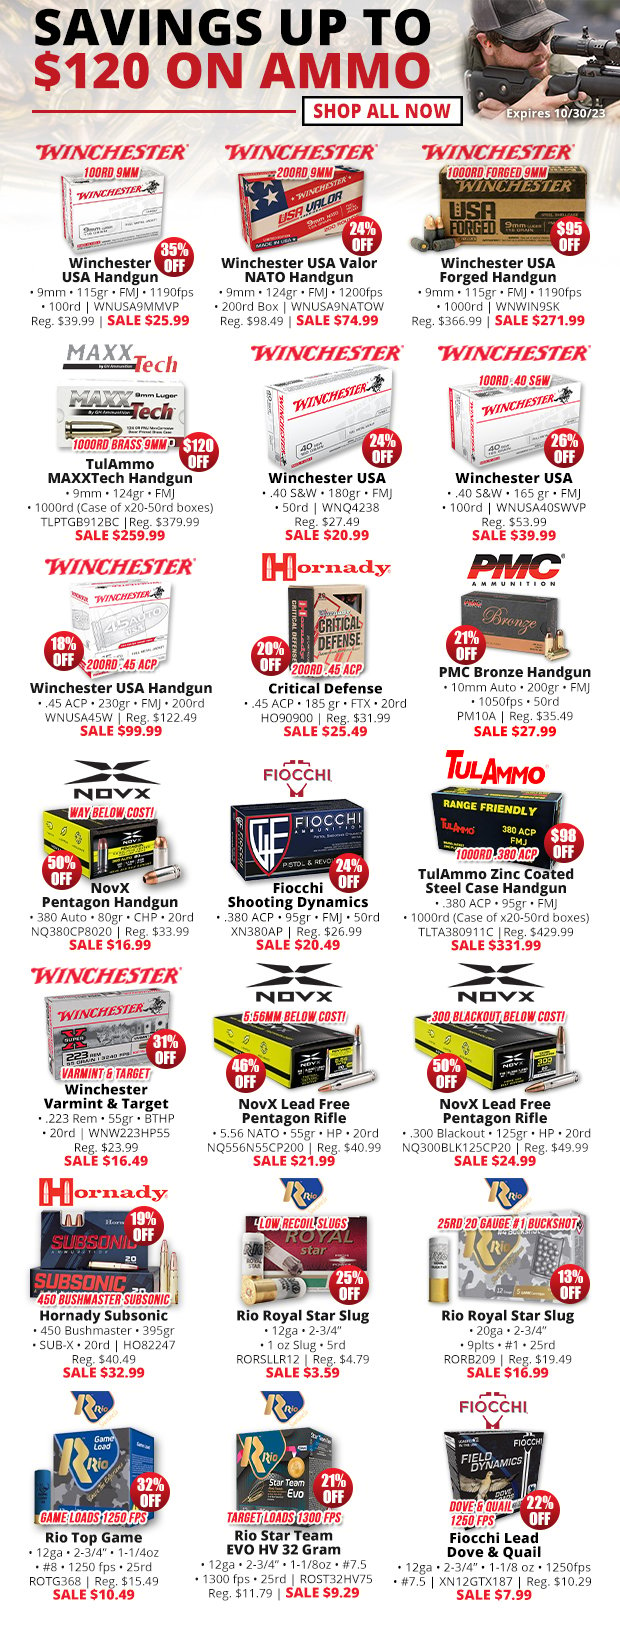 Up to $120 Off Ammo!